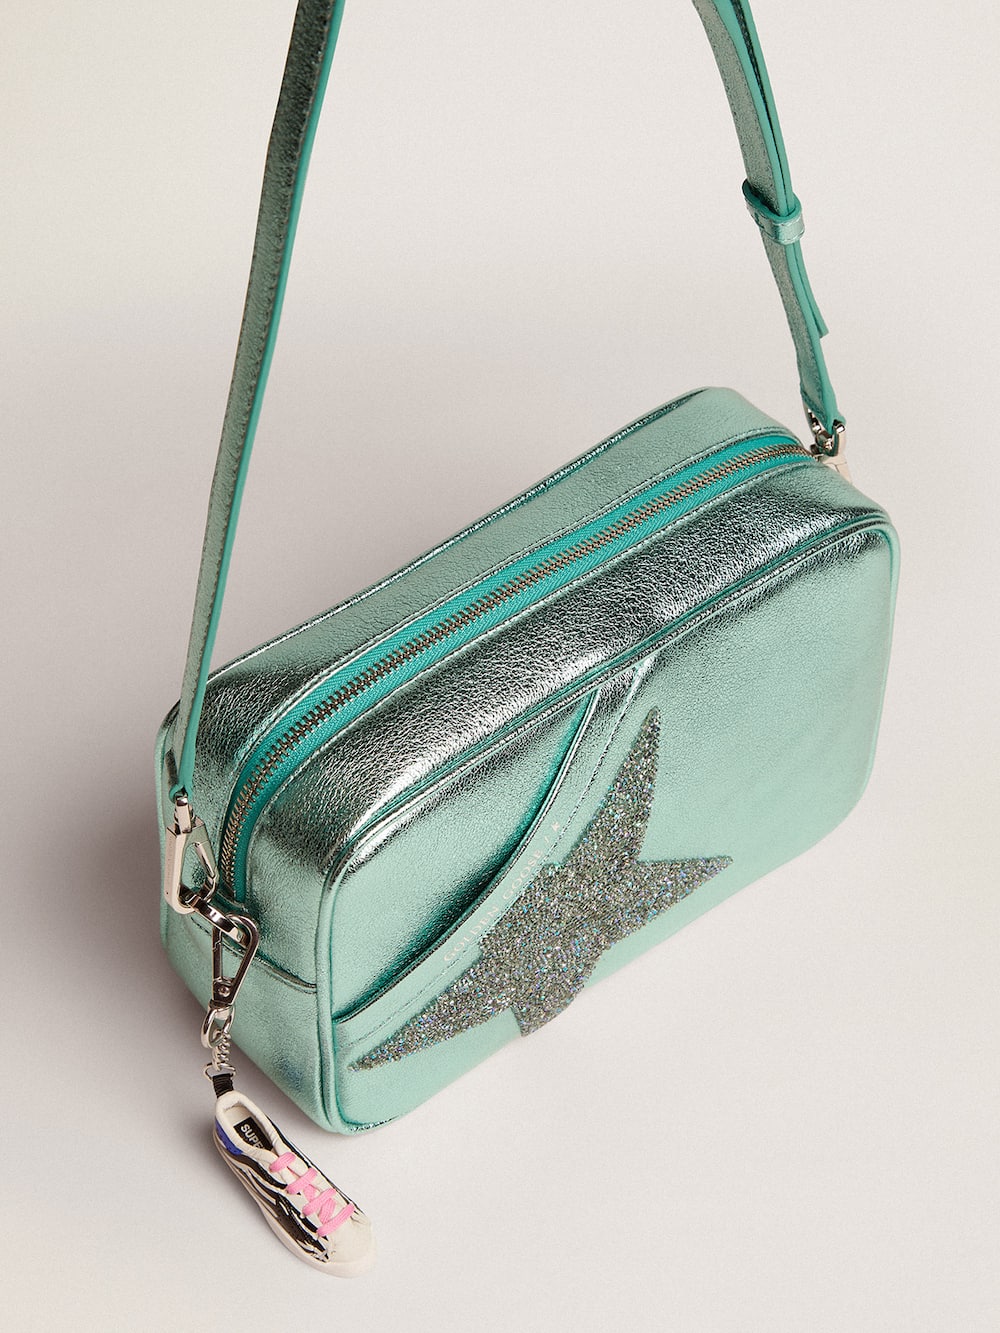 Golden Goose - Women's Star Bag in turquoise leather with star in Swarovski crystals in 